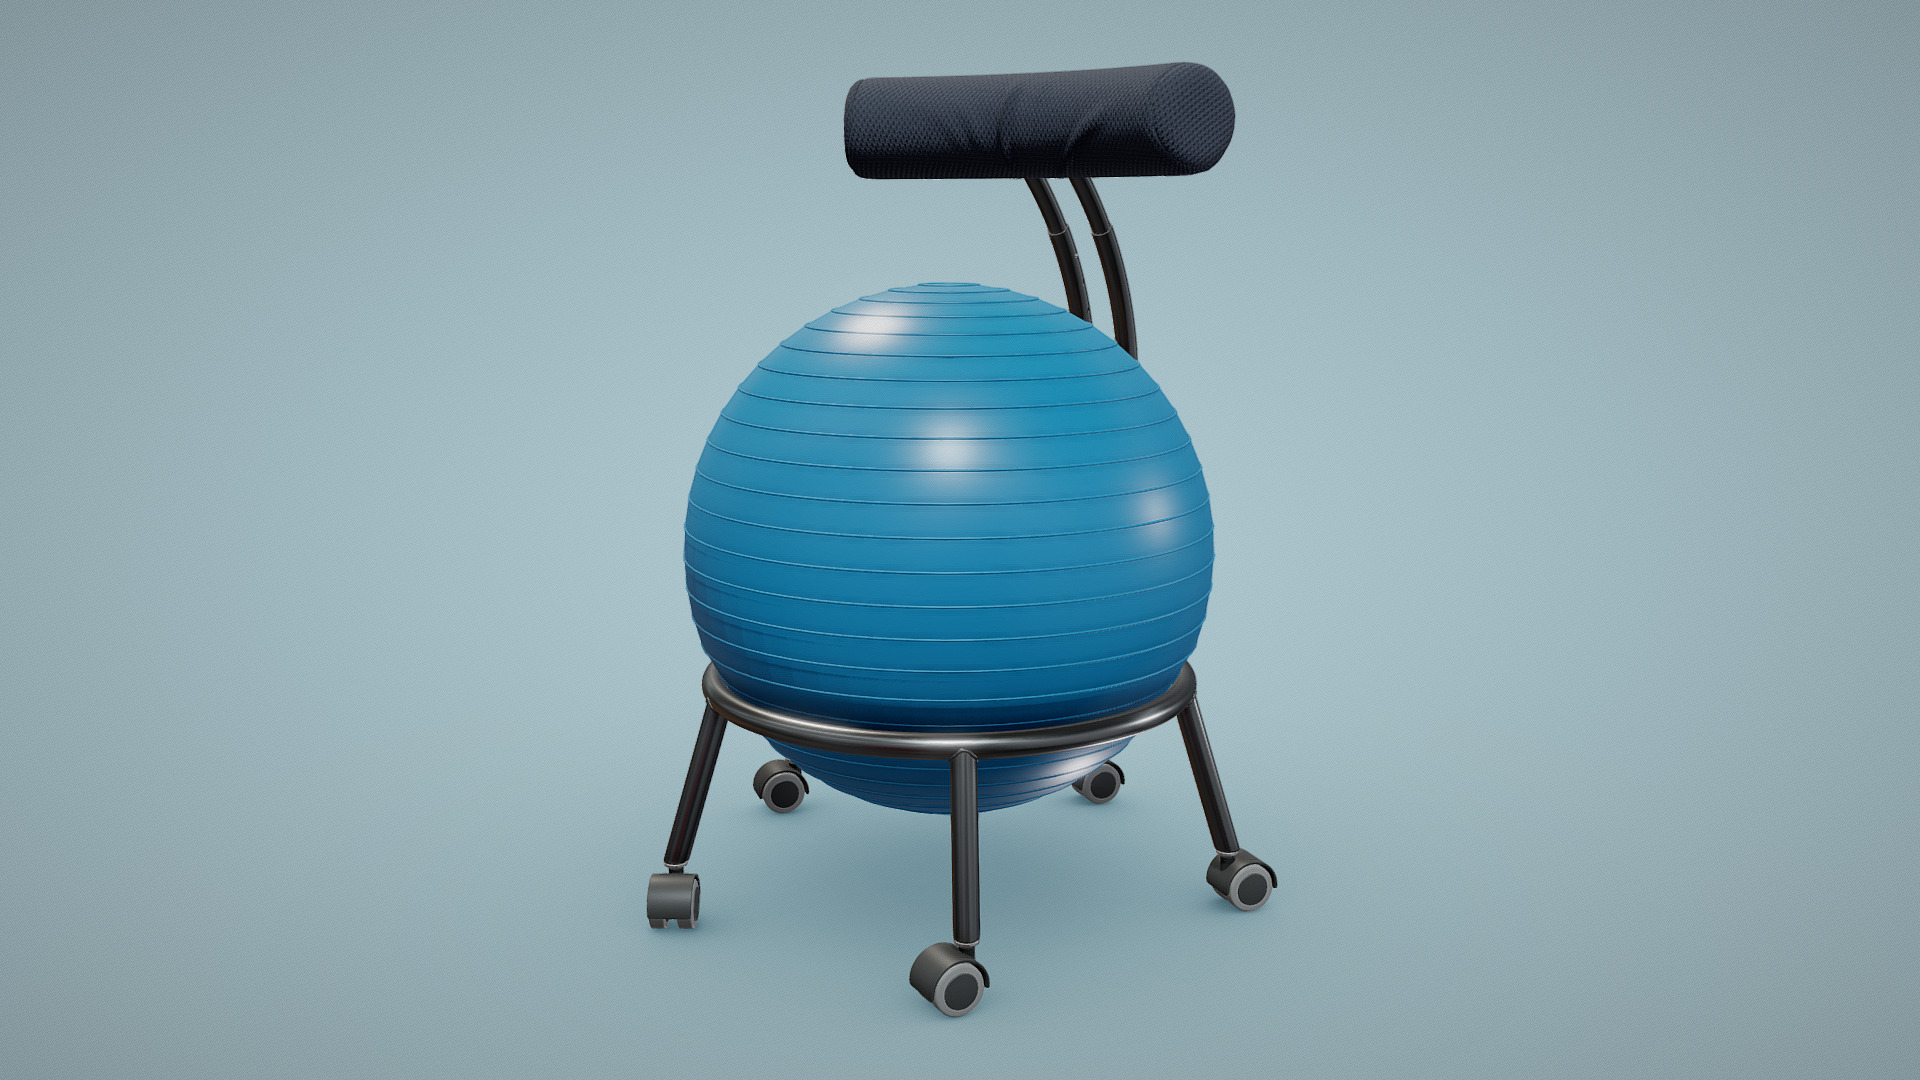 3D model Yoga Ball Office Chair - This is a 3D model of the Yoga Ball Office Chair. The 3D model is about a blue and black chair.